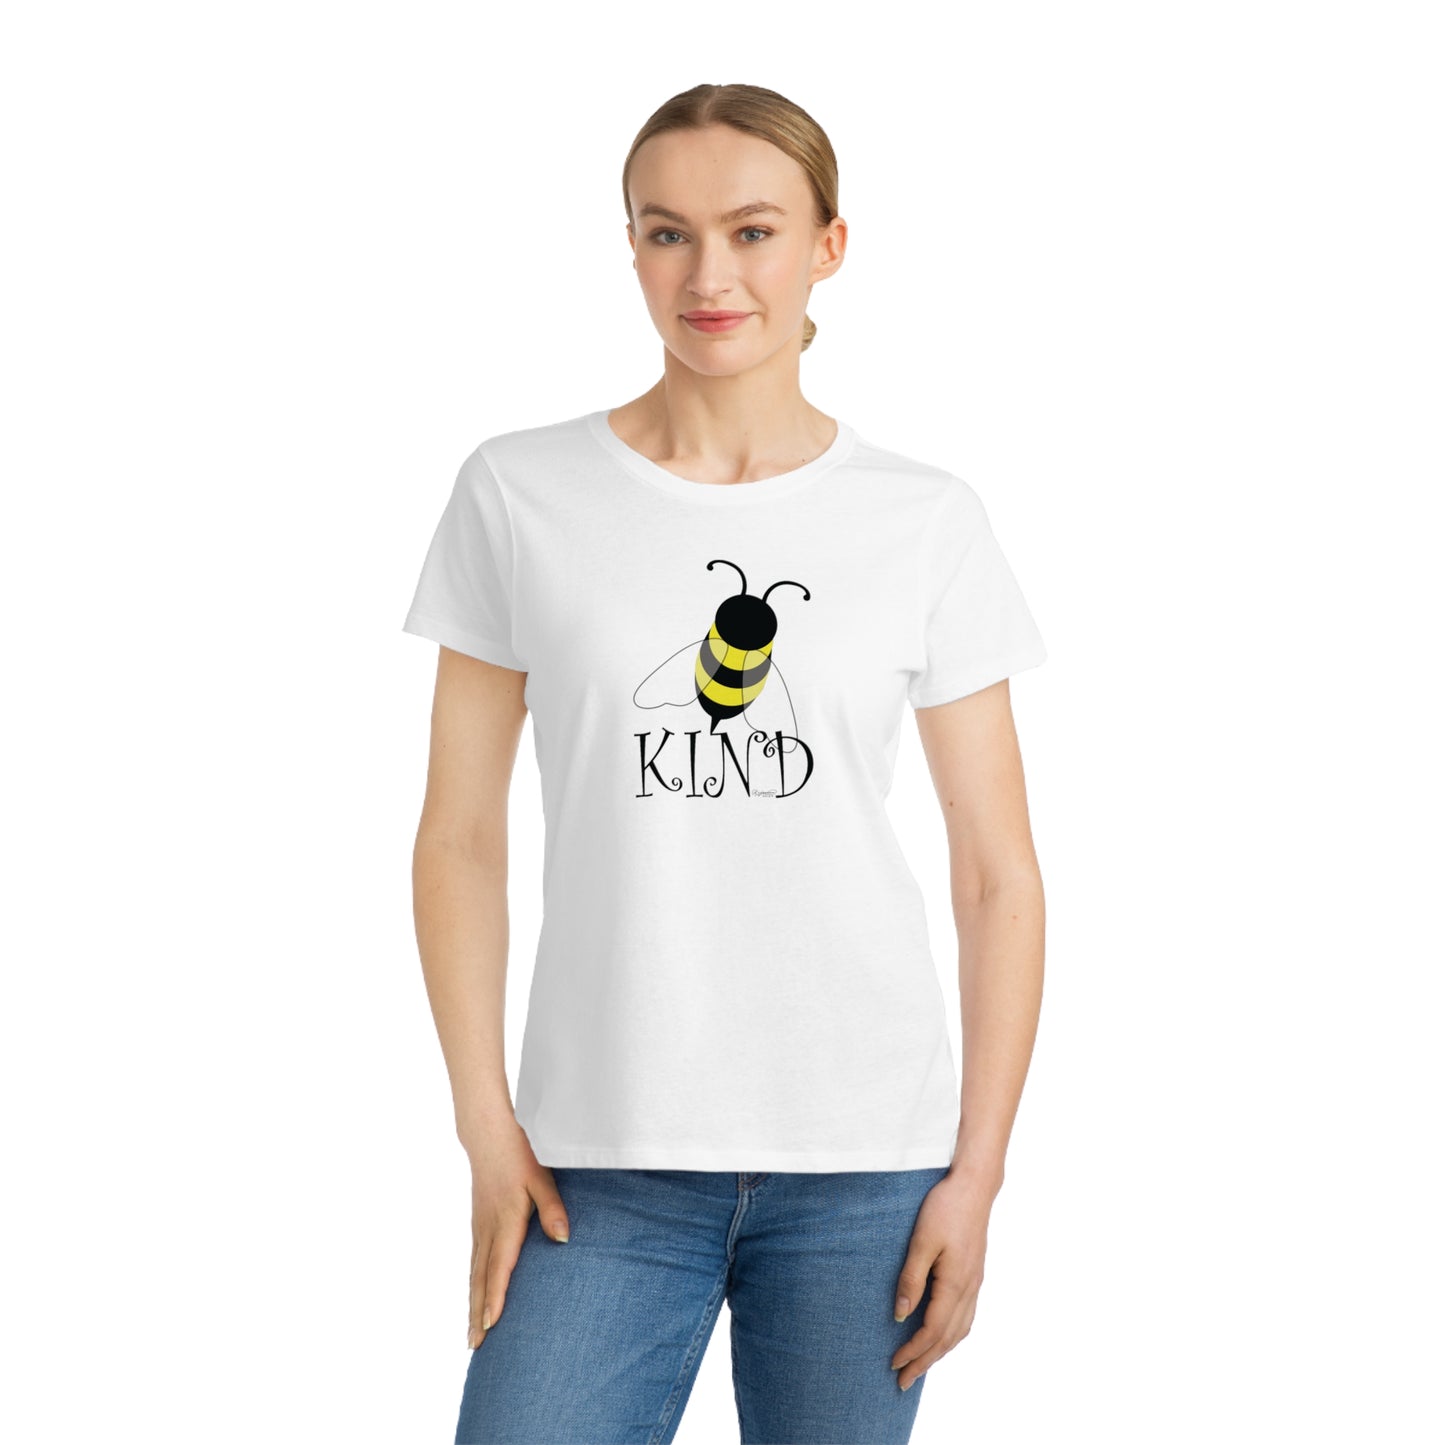 Bee Kind: The Women's Classic Organic Cotton T-Shirt That Inspires Compassion